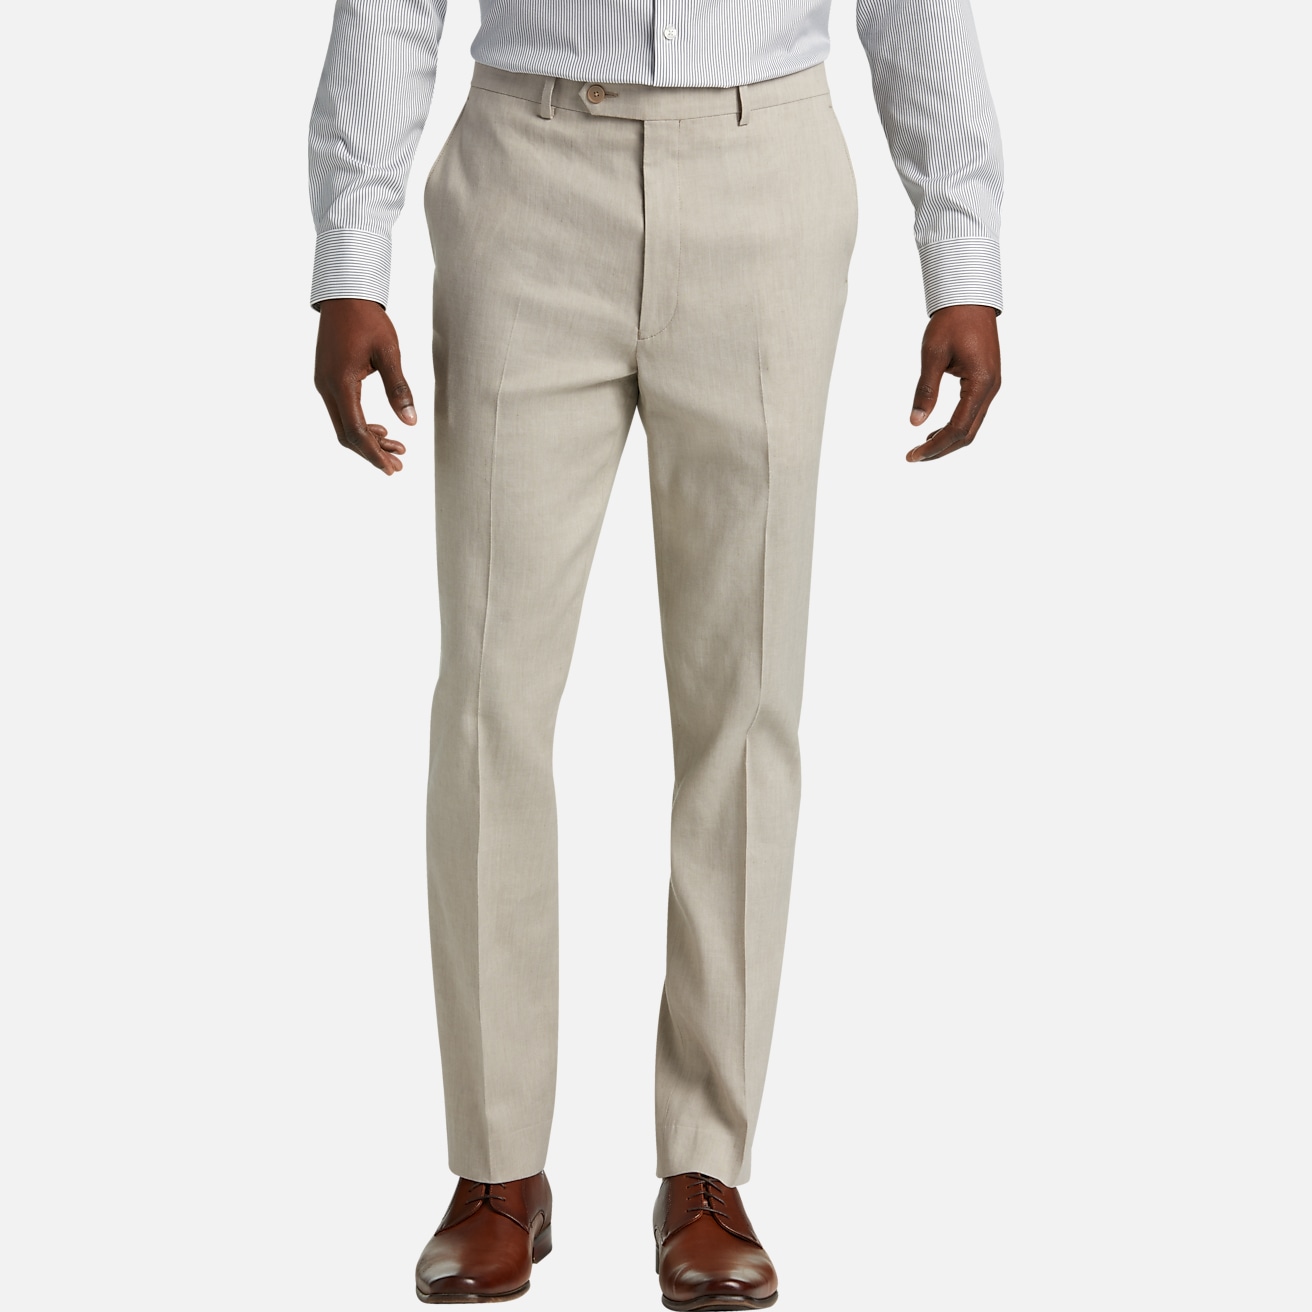 Jos. A. Bank Tailored Fit Dress Pants CLEARANCE - All Clearance